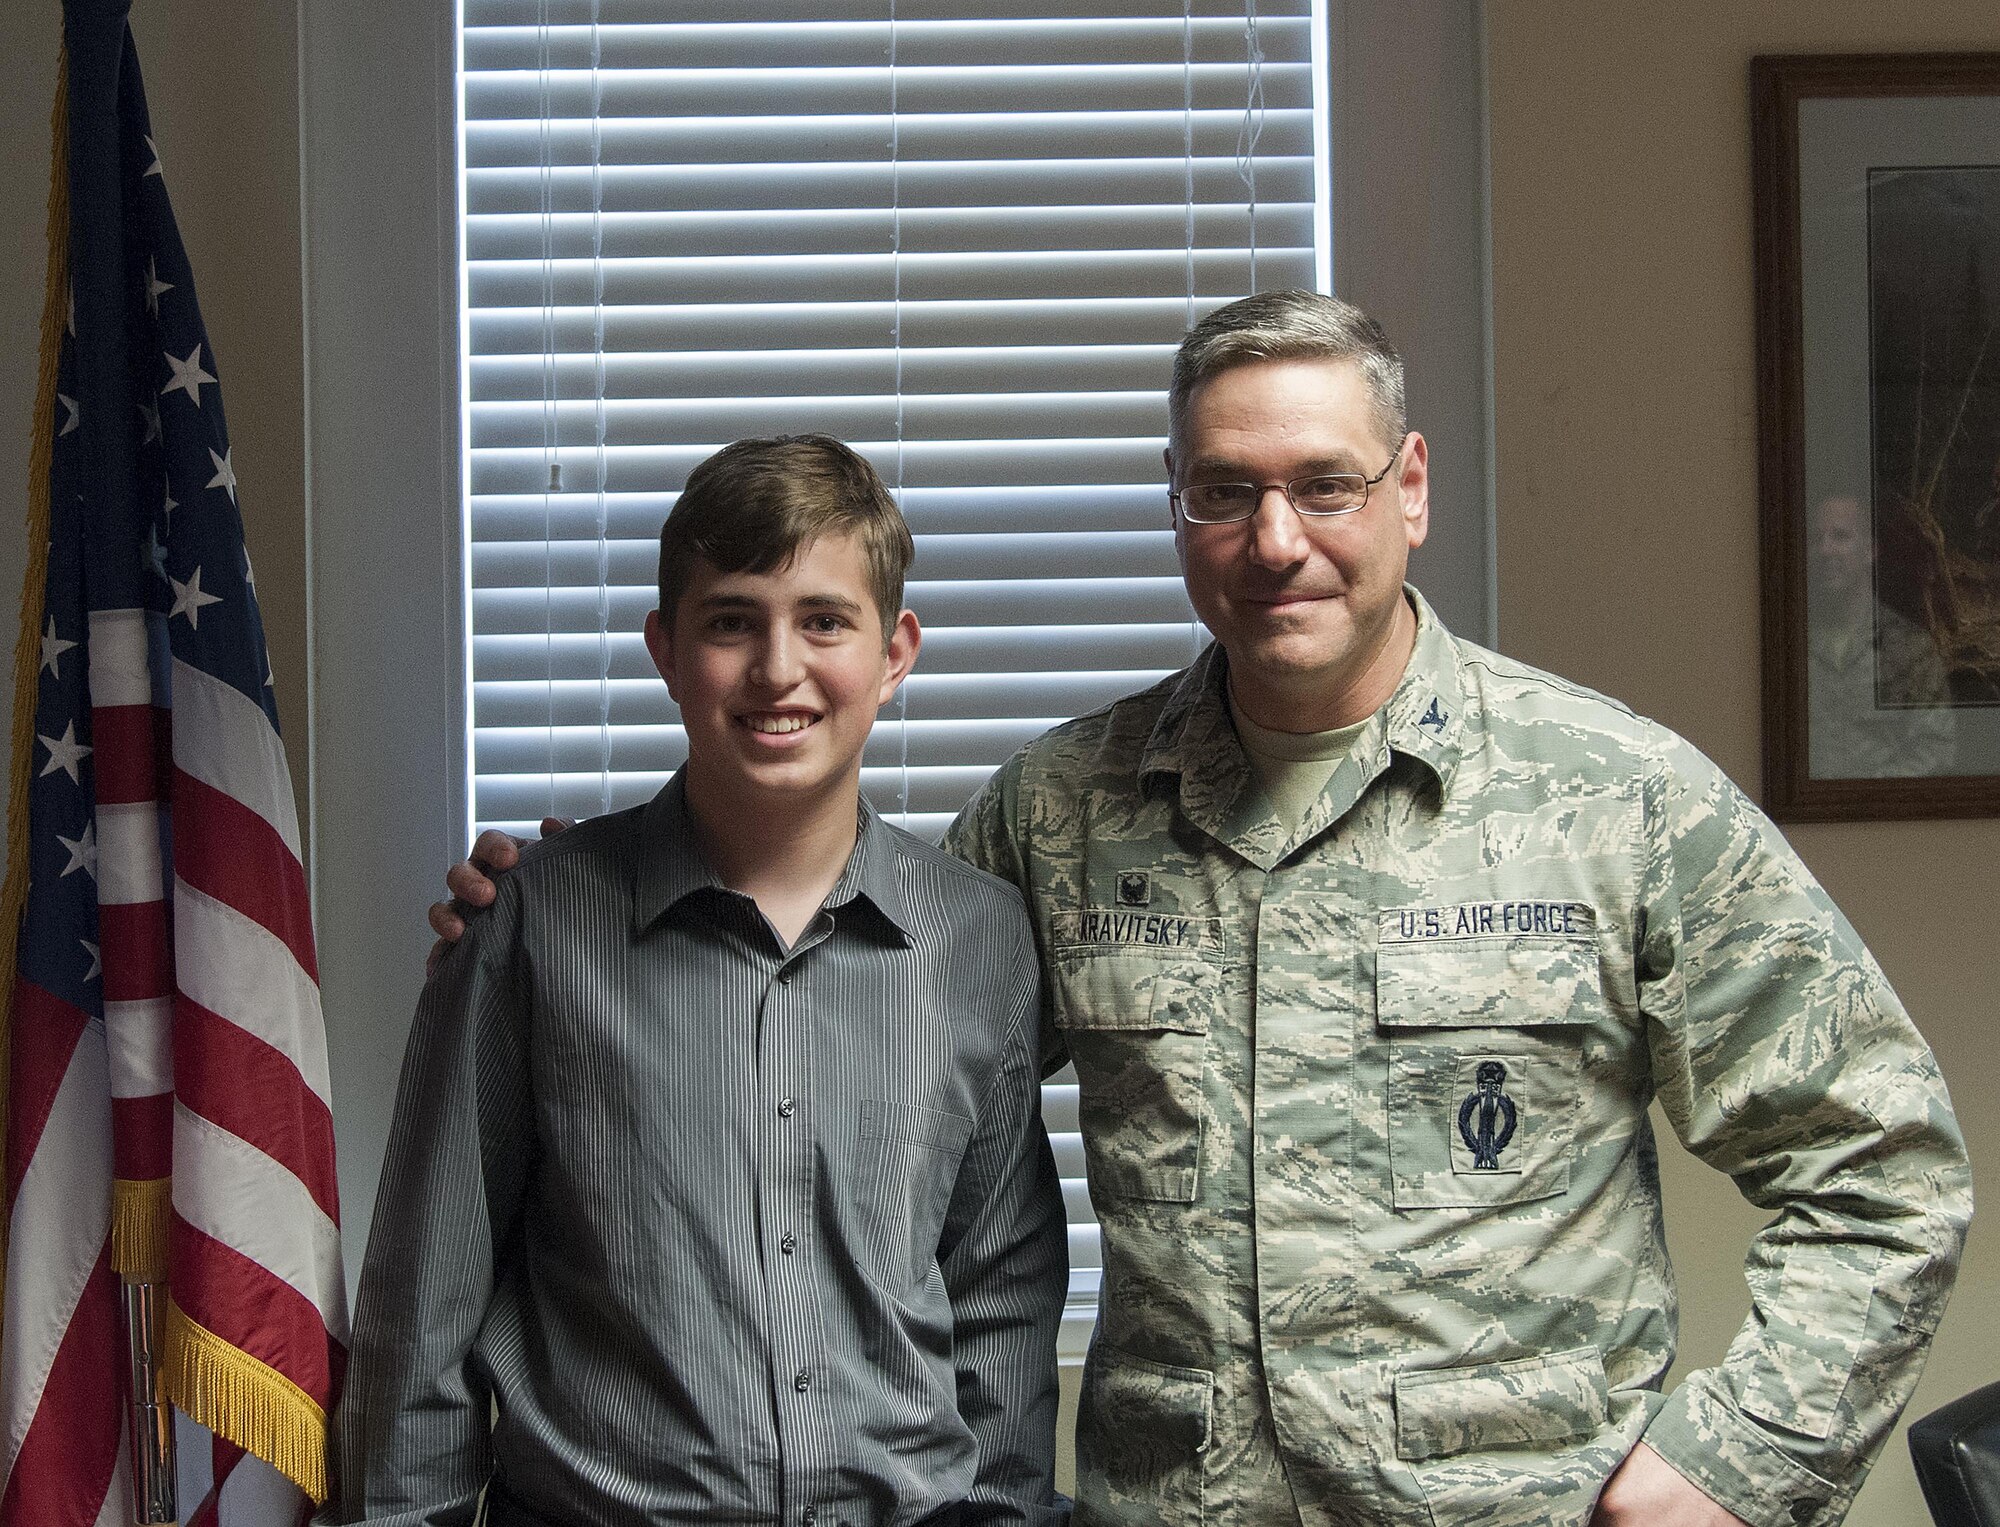 Col. Stephen Kravitsky, 90th Missile Wing commander, poses for a photo with James Gay, 16, a former F.E. Warren Commissary employee, April 12, 2016, on F.E. Warren Air Force Base, Wyo. Kravitsky presented Gay with a commander's coin for saving the life of a co-worker when he worked in the commissary. (U.S. Air Force photo by Senior Airman Jason Wiese)